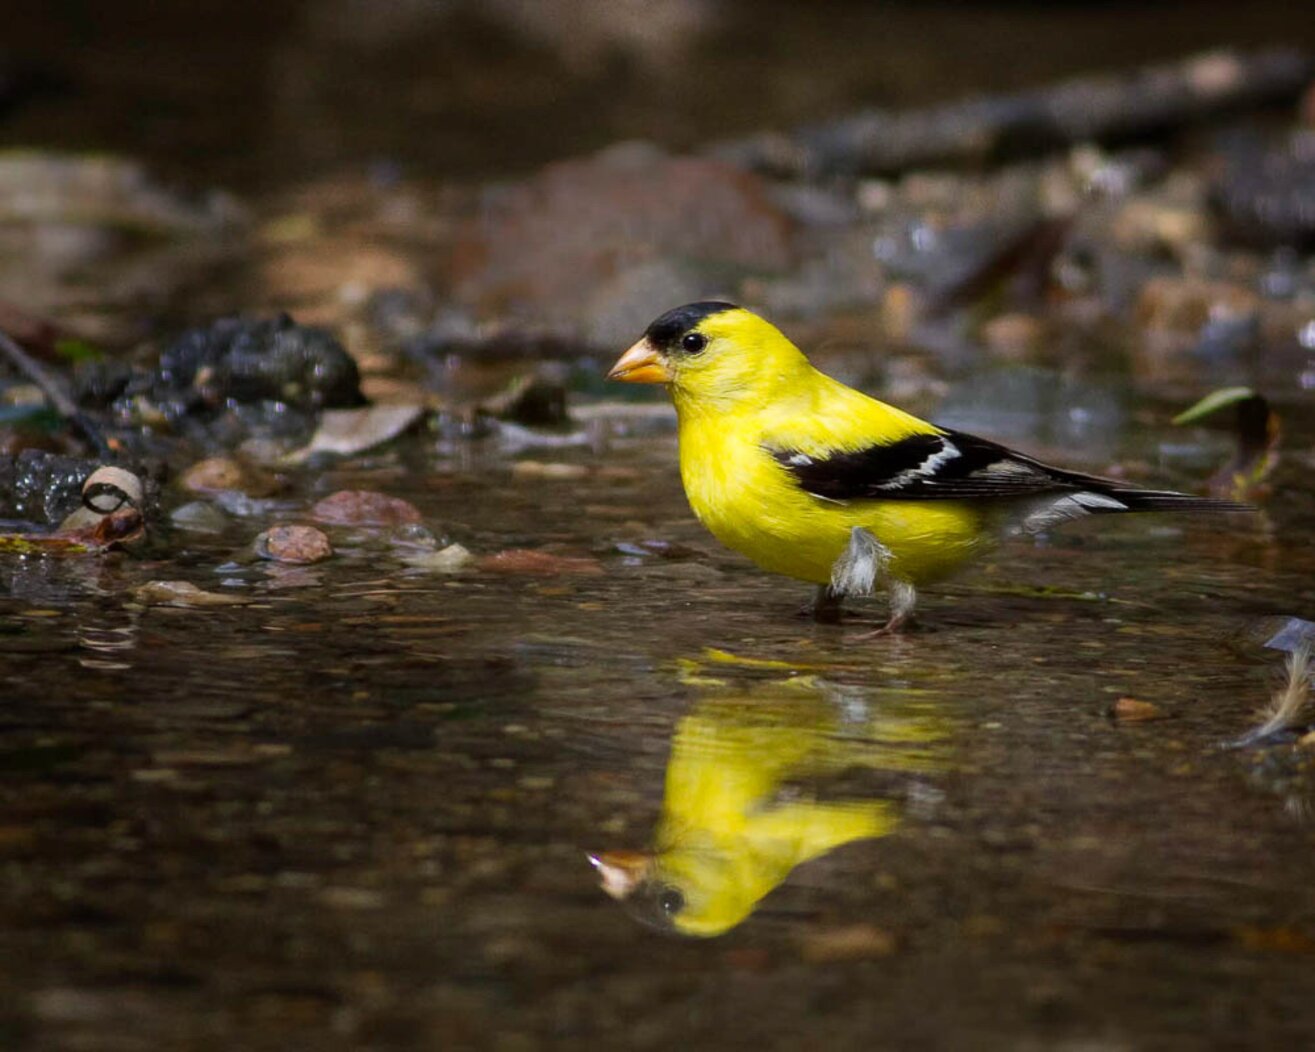 American Goldfinches may come down to take a drink or bathe in Swindler Cove Park. Photo: Sharron Crocker/Audubon Photography Awards